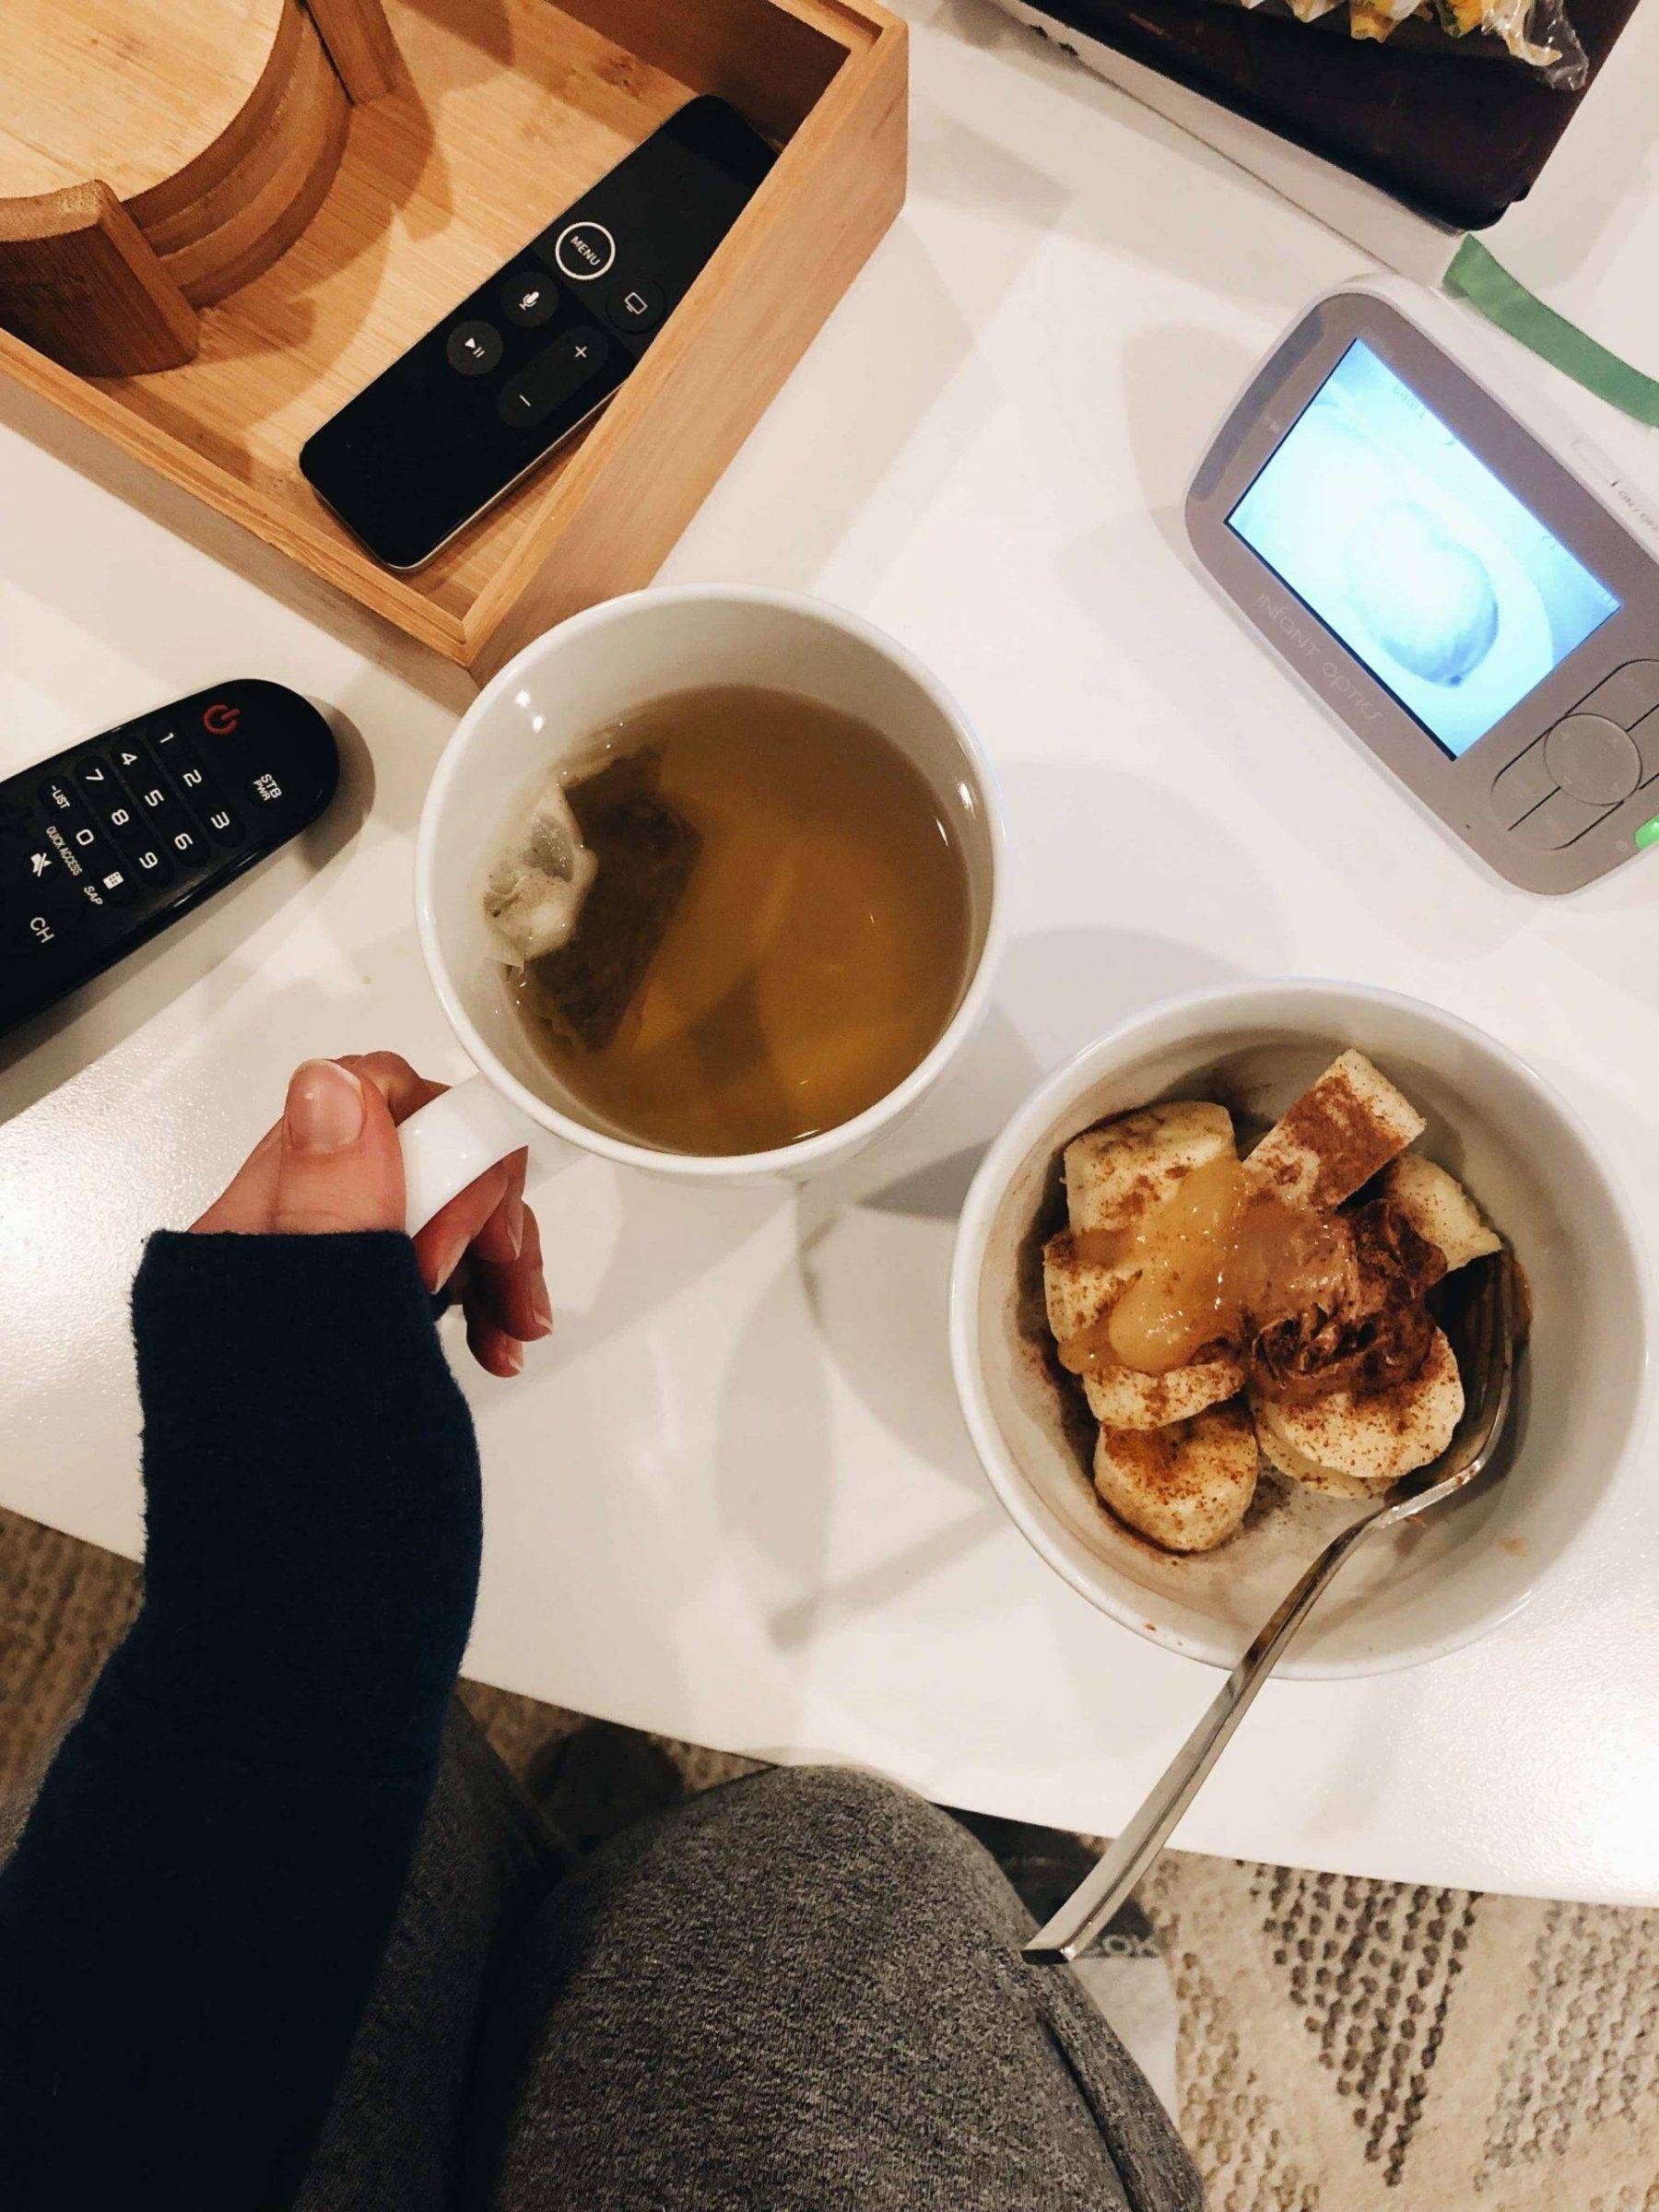 A counter with remotes, tea, a bowl of bananas, and a baby monitor.